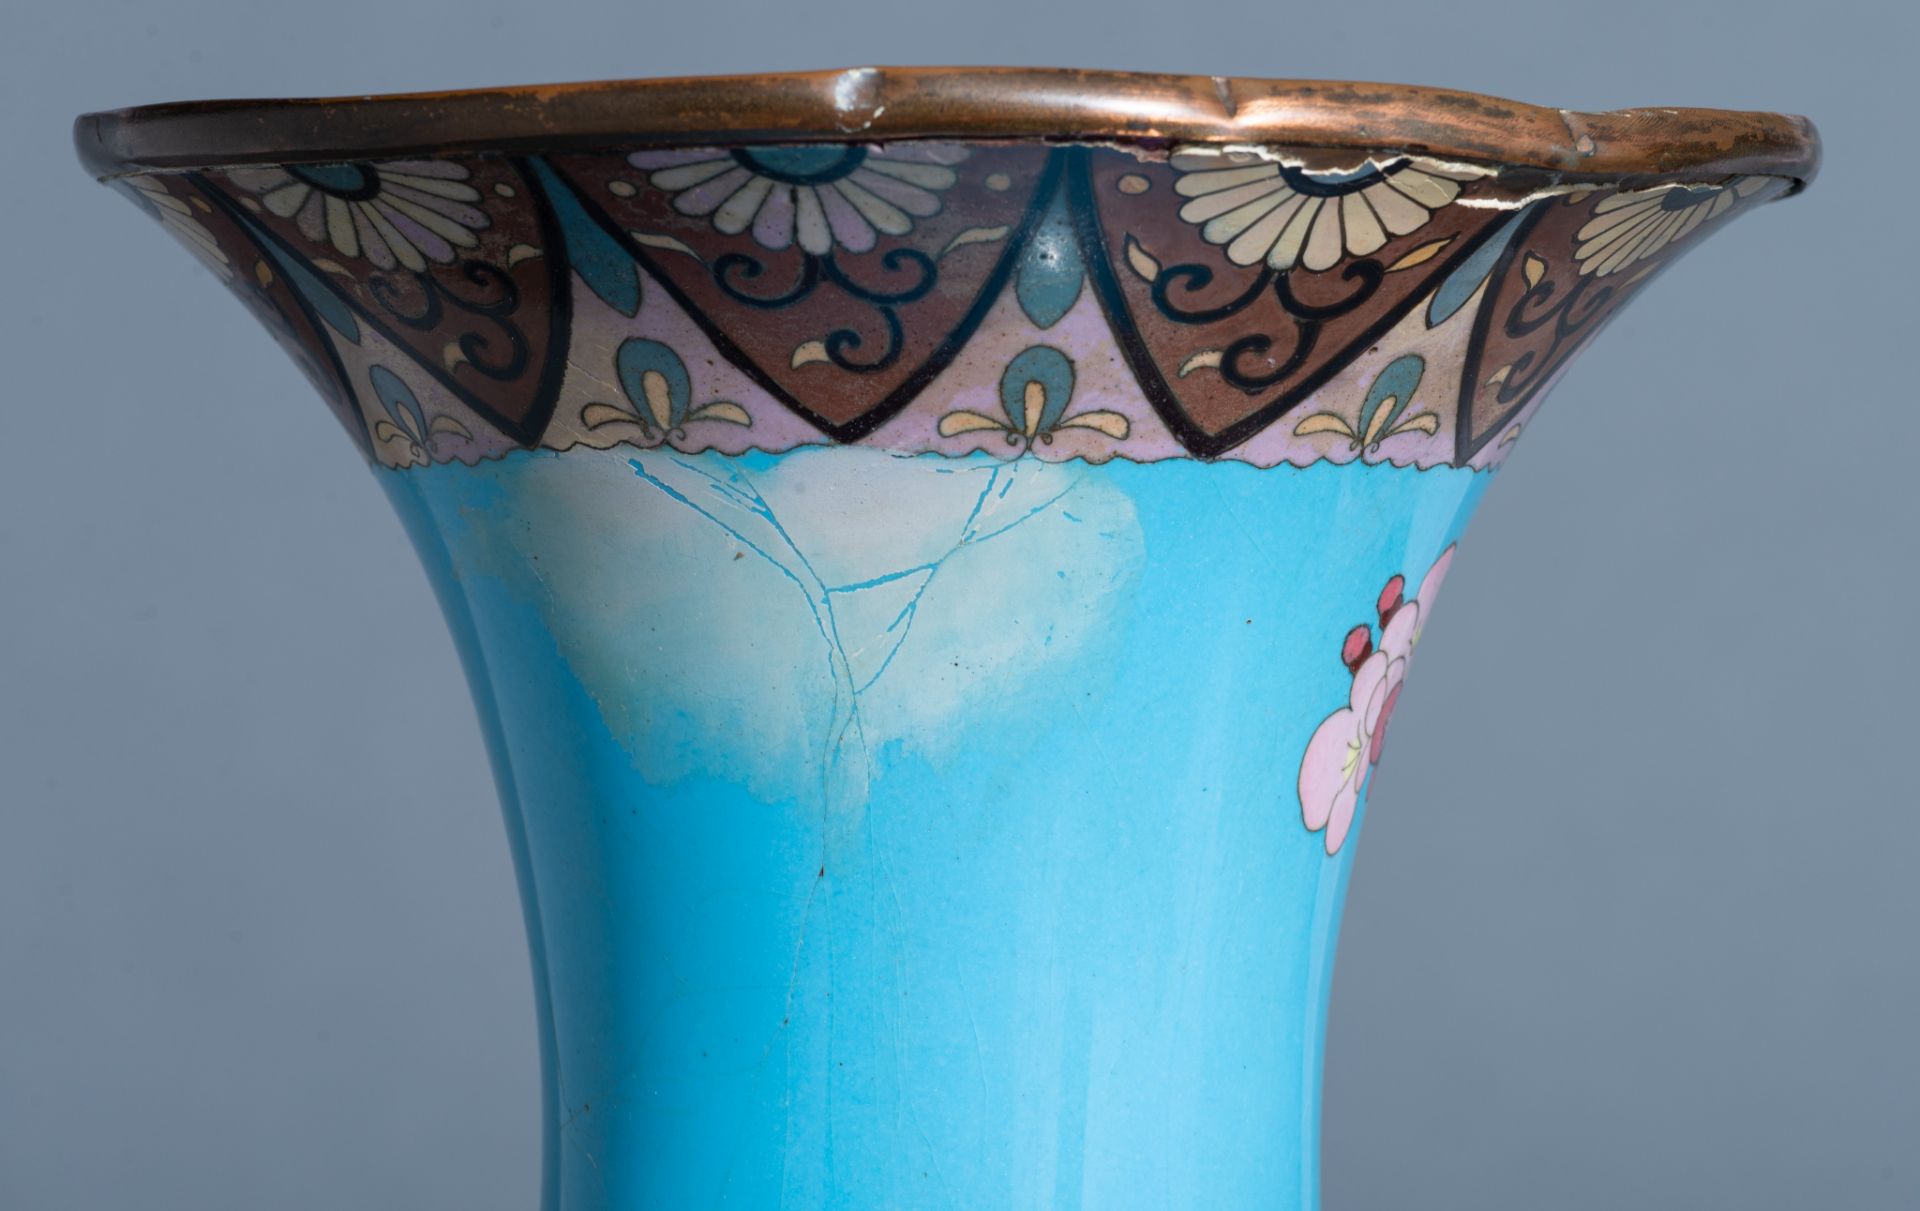 A Japanese cloisonné enamelled bronze vase, late 19thC/early 20thC, H 92,5 cm - Image 9 of 11